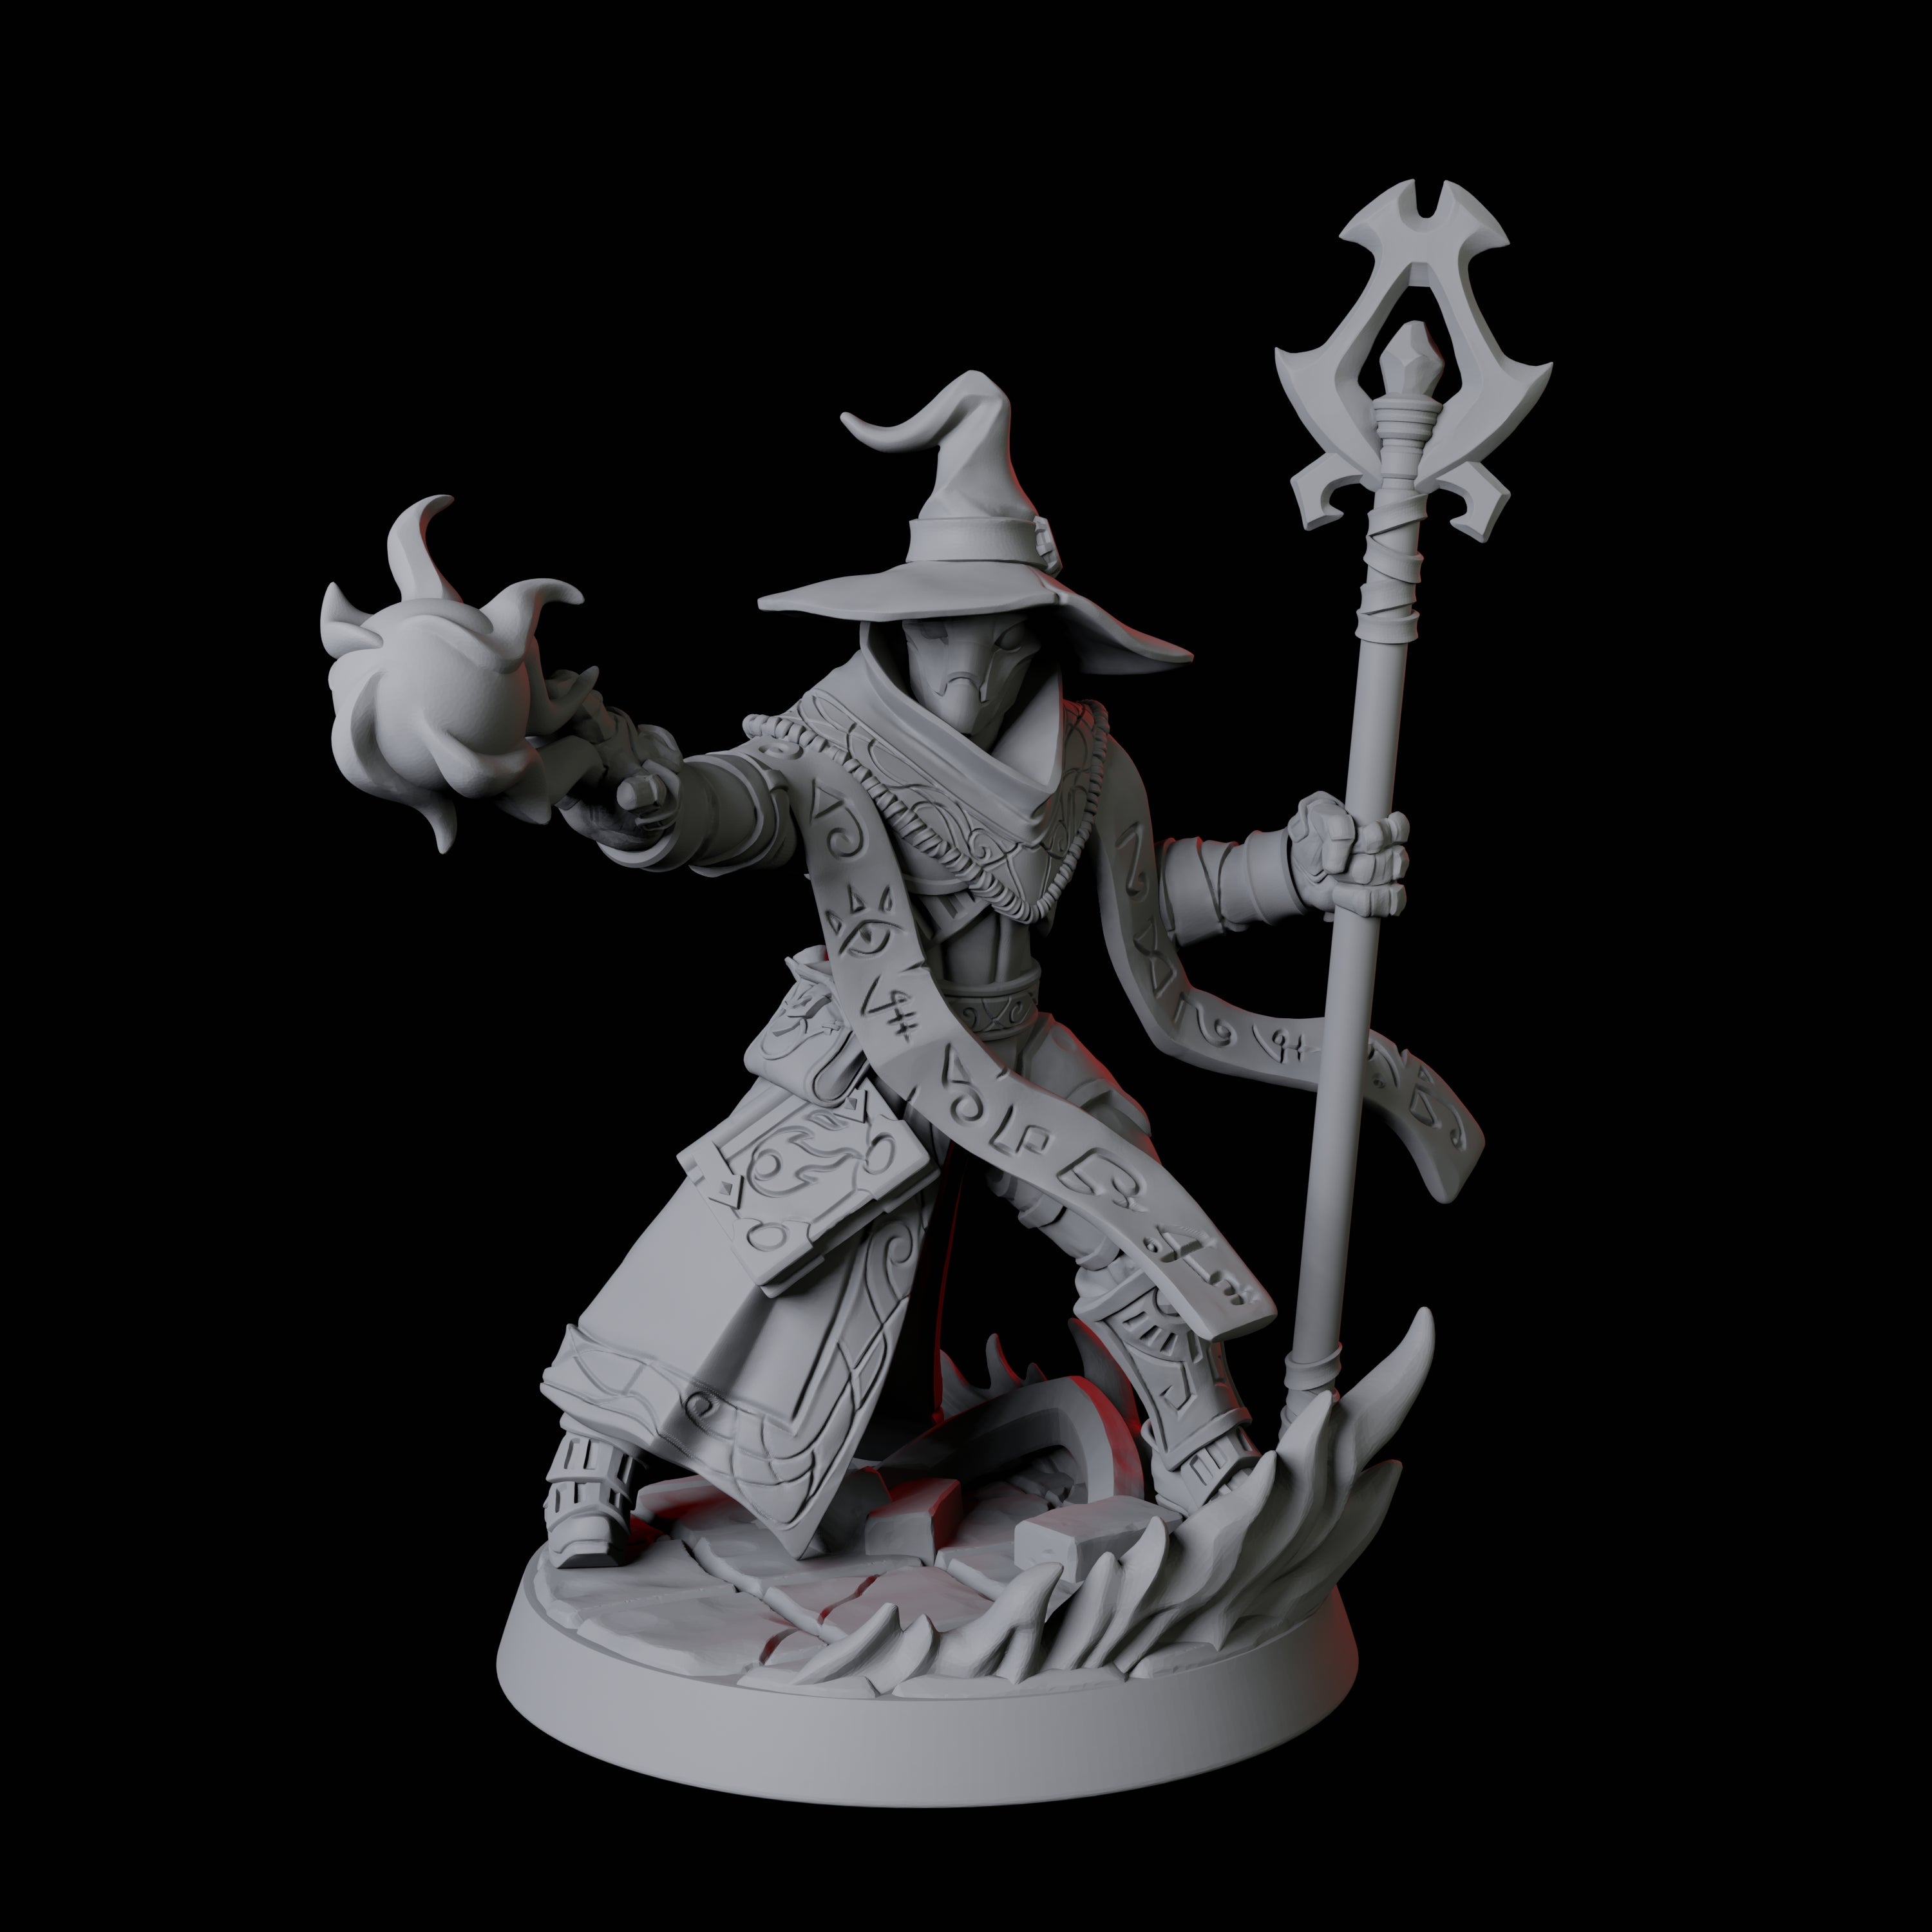 Warforged Wizard Miniature for Dungeons and Dragons, Pathfinder or other TTRPGs